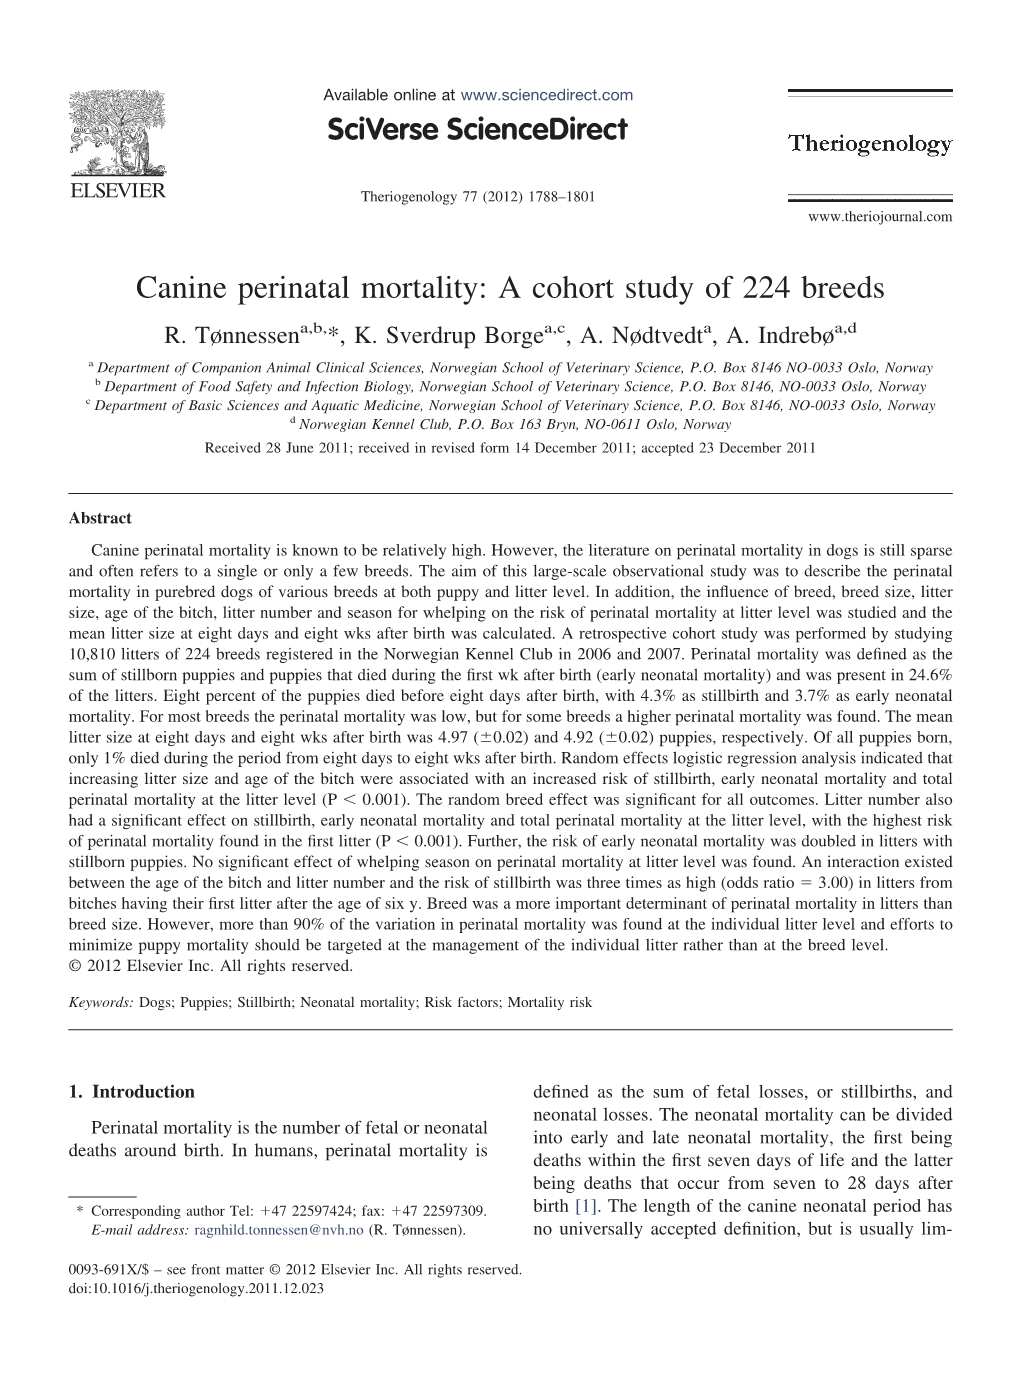 Canine Perinatal Mortality: a Cohort Study of 224 Breeds R